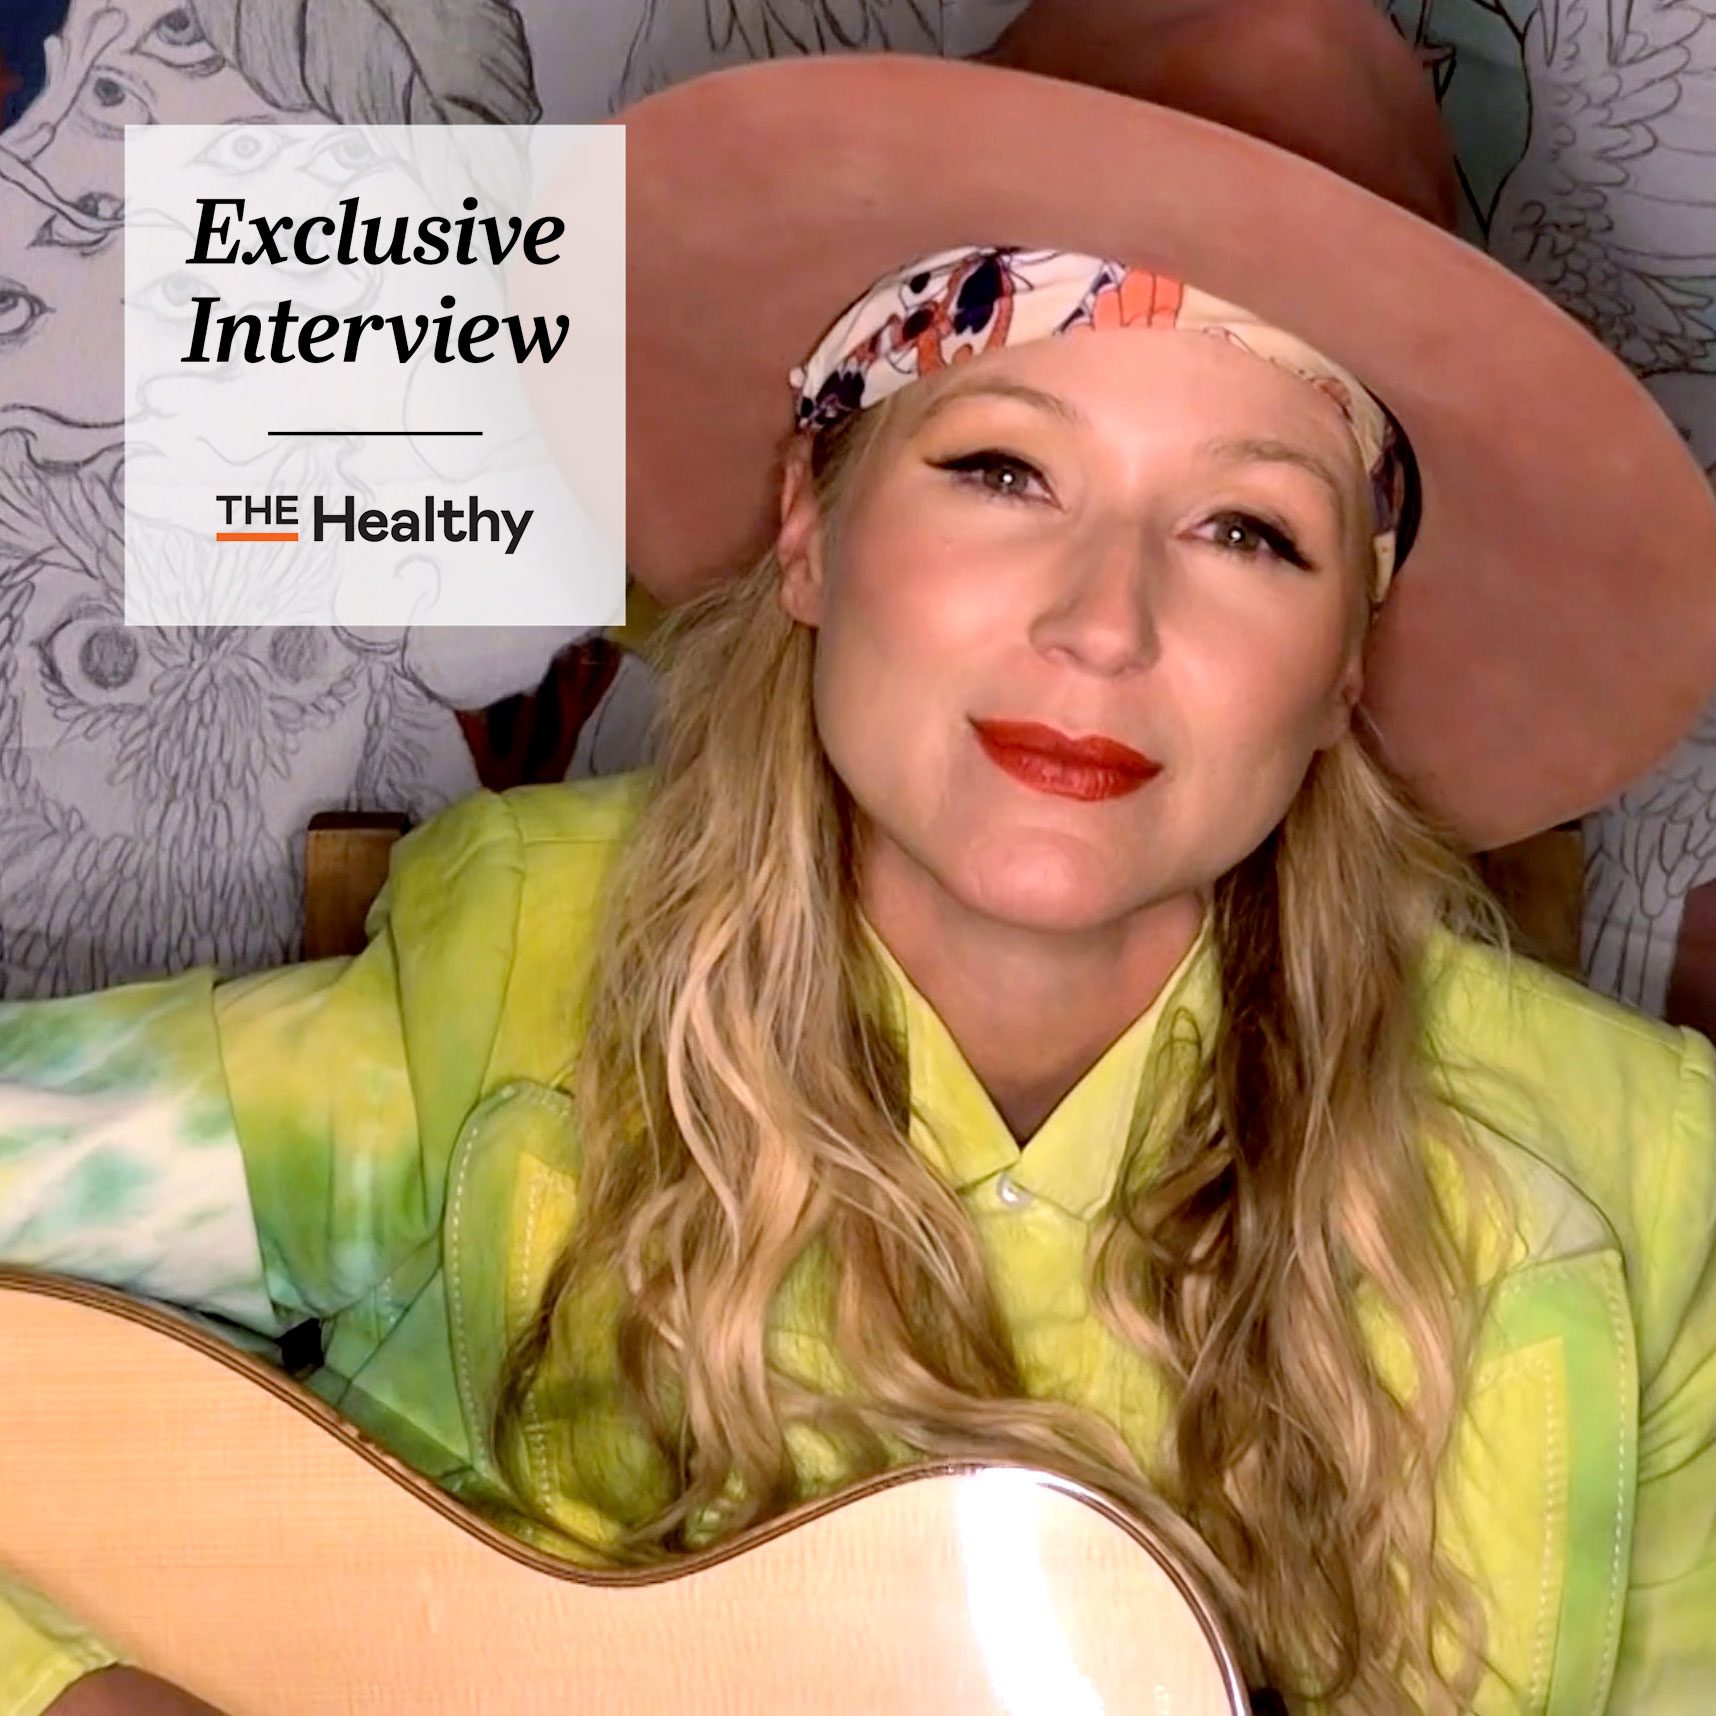 Grammy-Nominated Singer-Songwriter Jewel Opens Up About Her